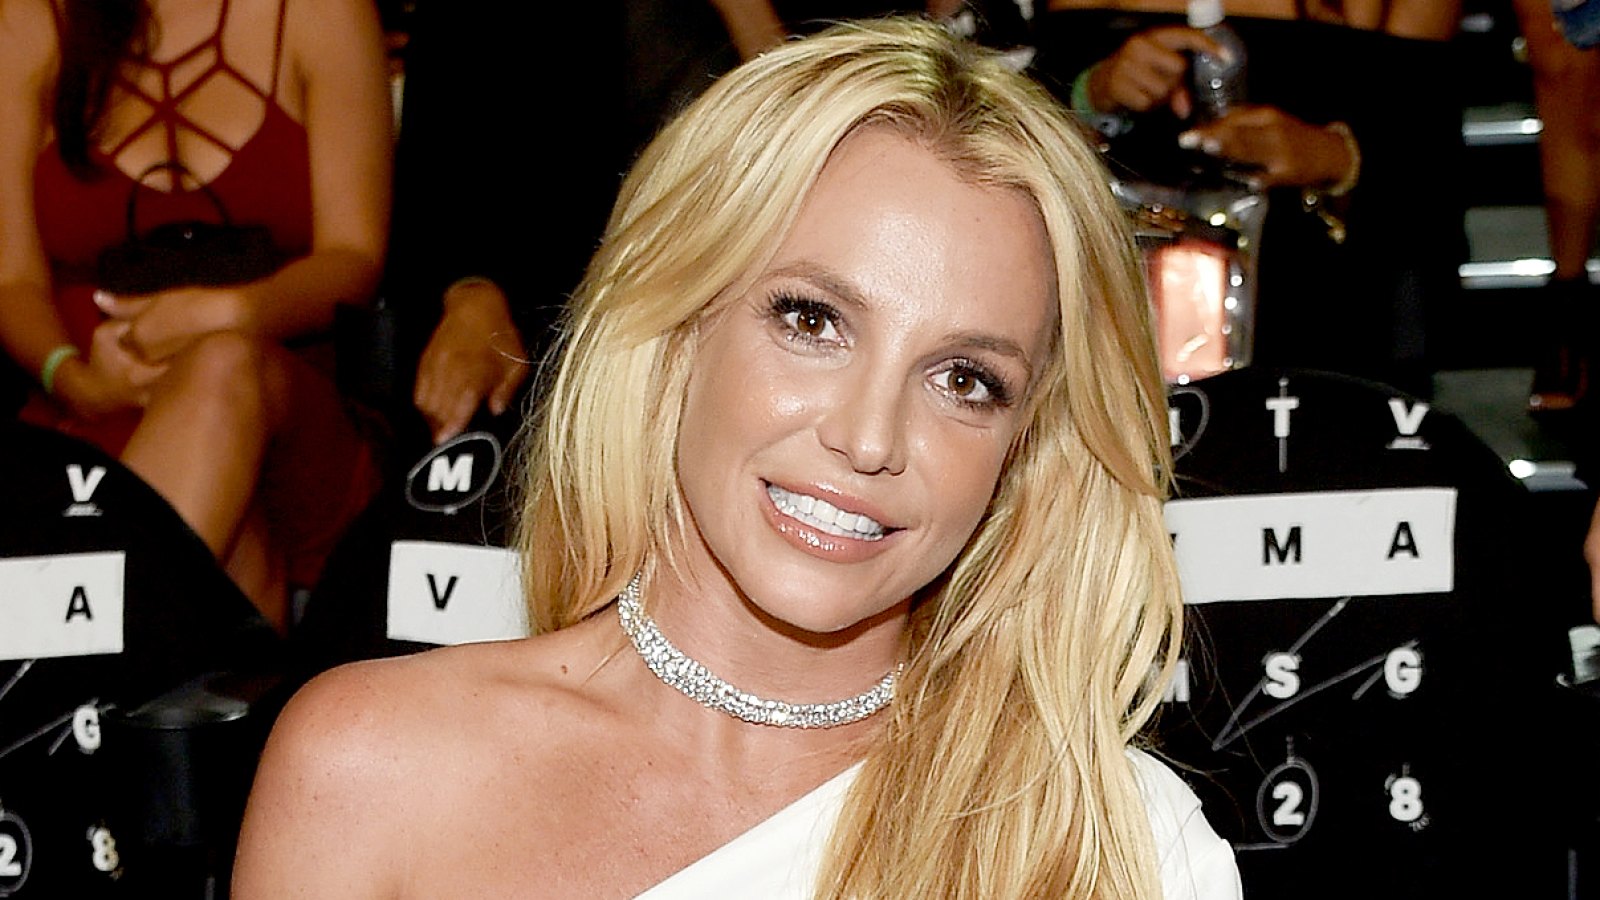 Britney Spears attends the 2016 MTV Music Video Awards.